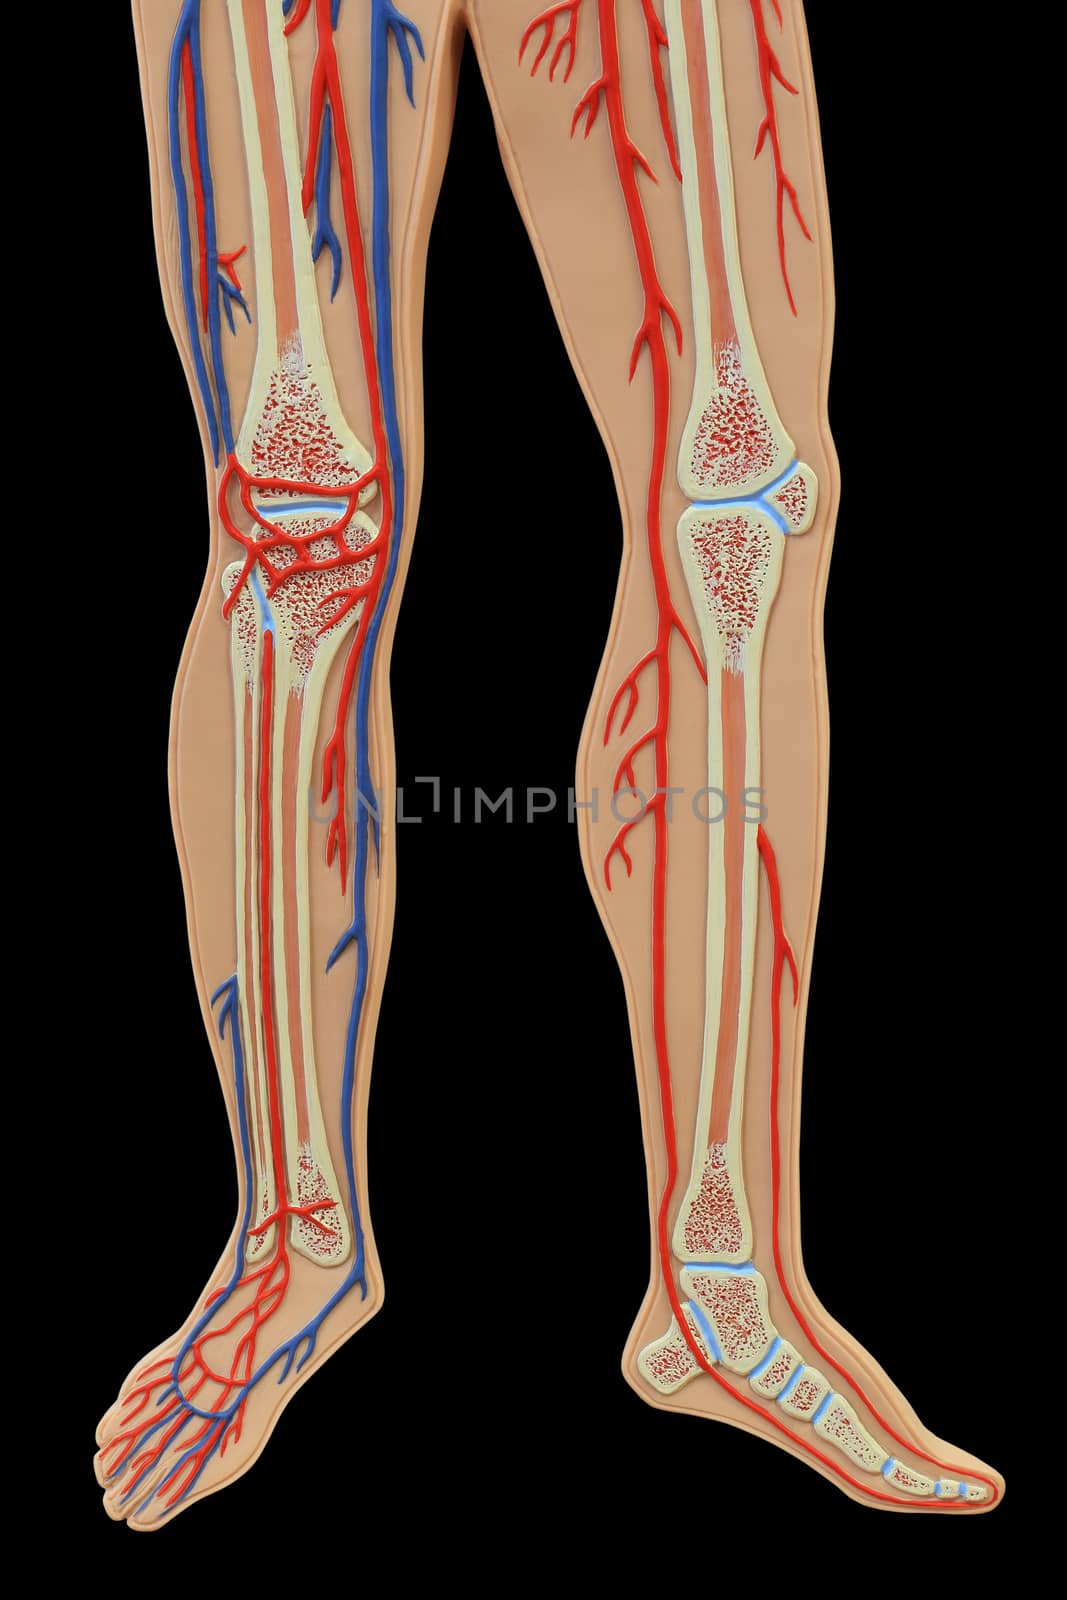 Plastic study model of leg isolated on black background an often used tool for medical study, clipping path.